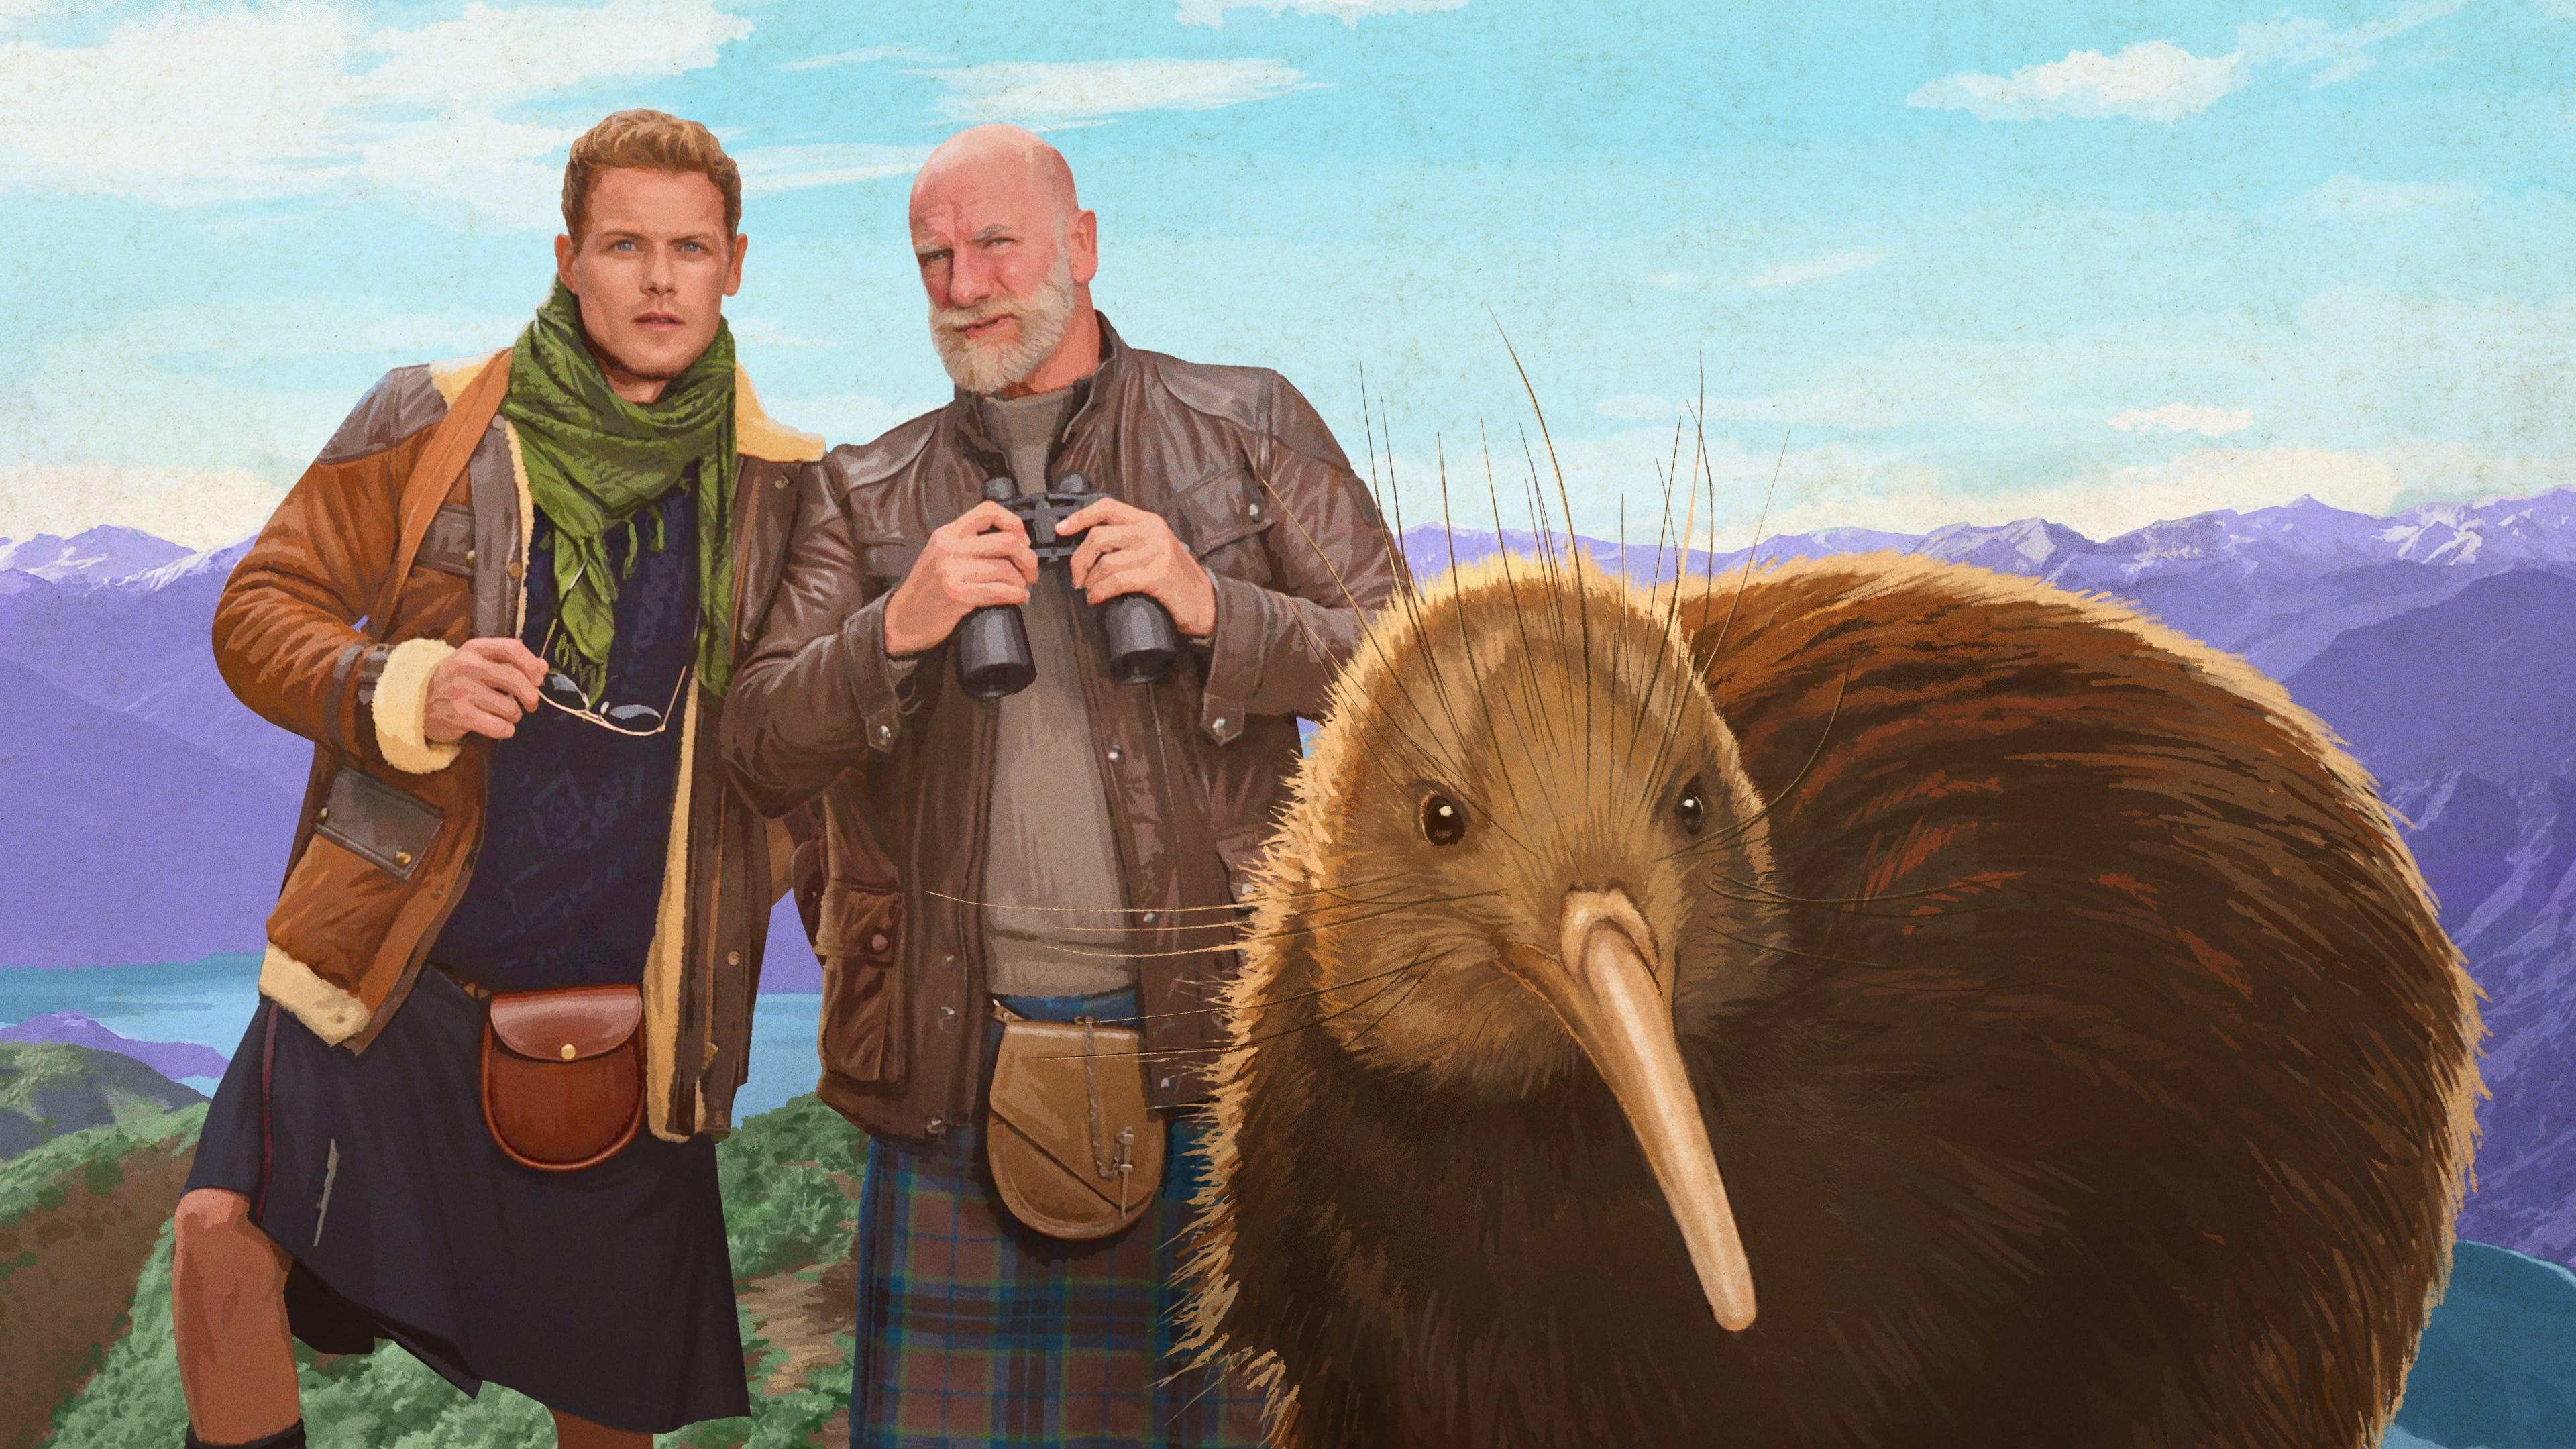 Men in Kilts: A Roadtrip with Sam and Graham backdrop